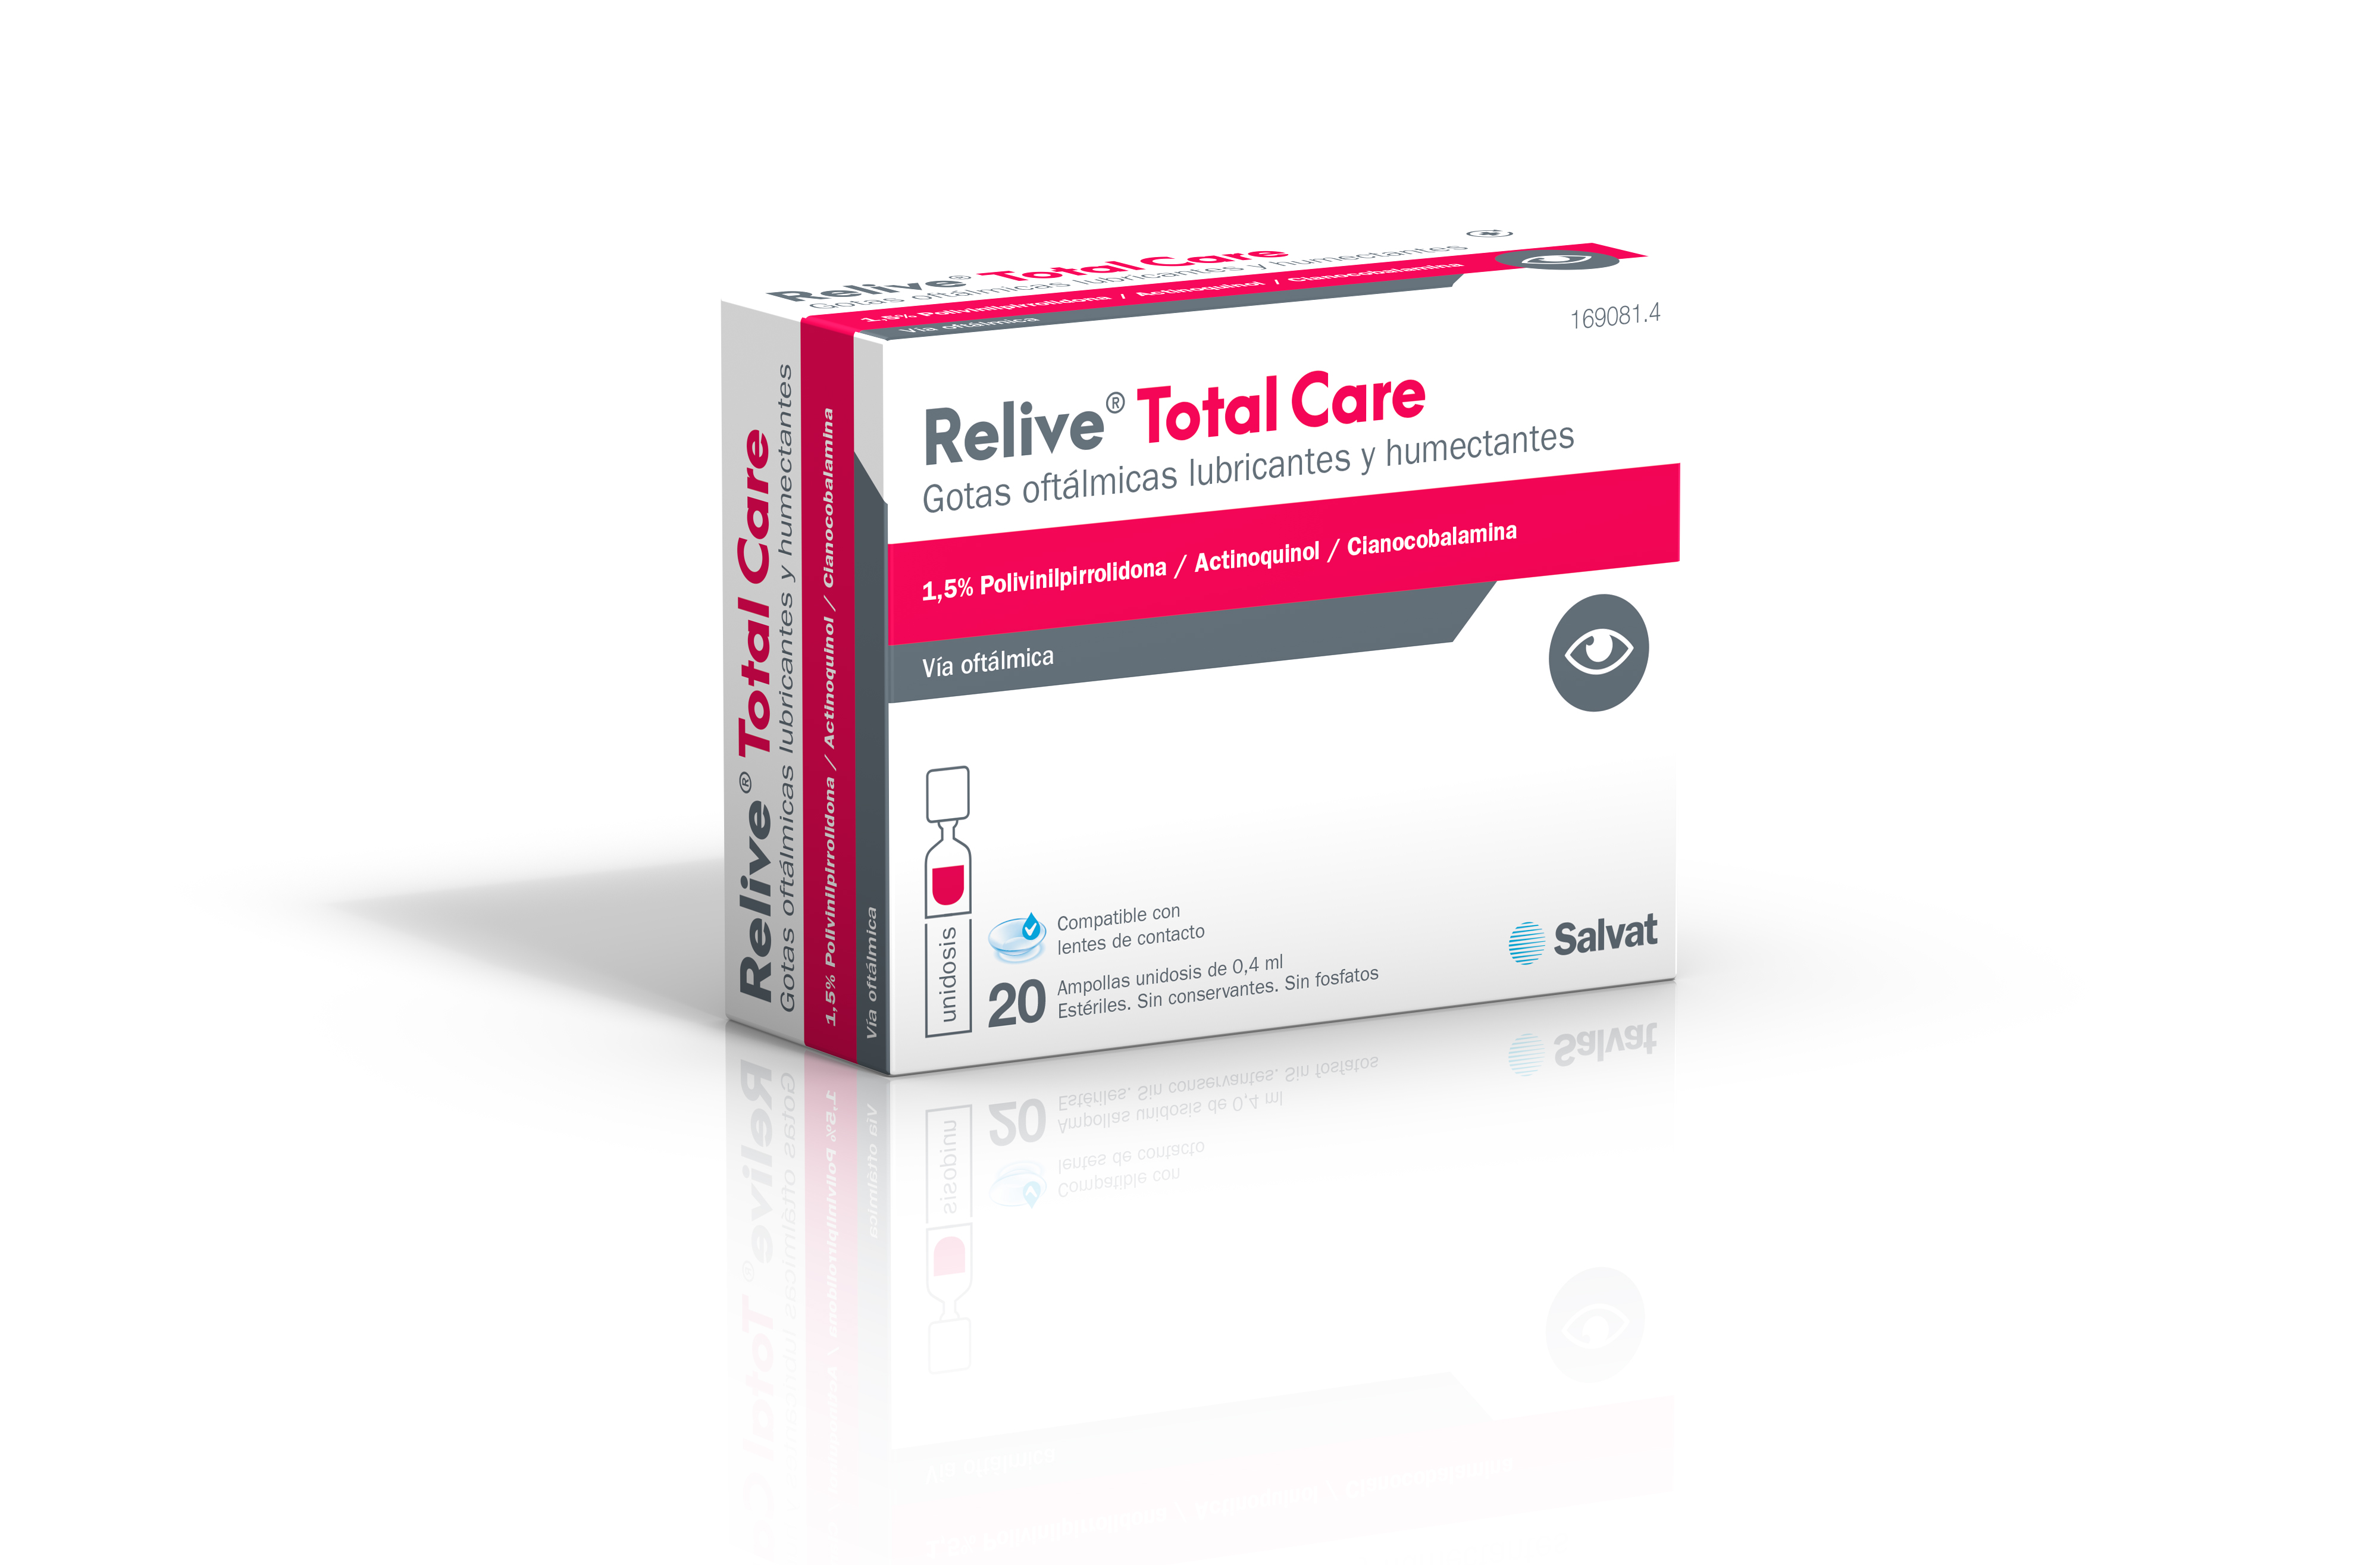 Relive Total Care - Lubrication + UV protection eye drops - single-dose vials eye drops - MD